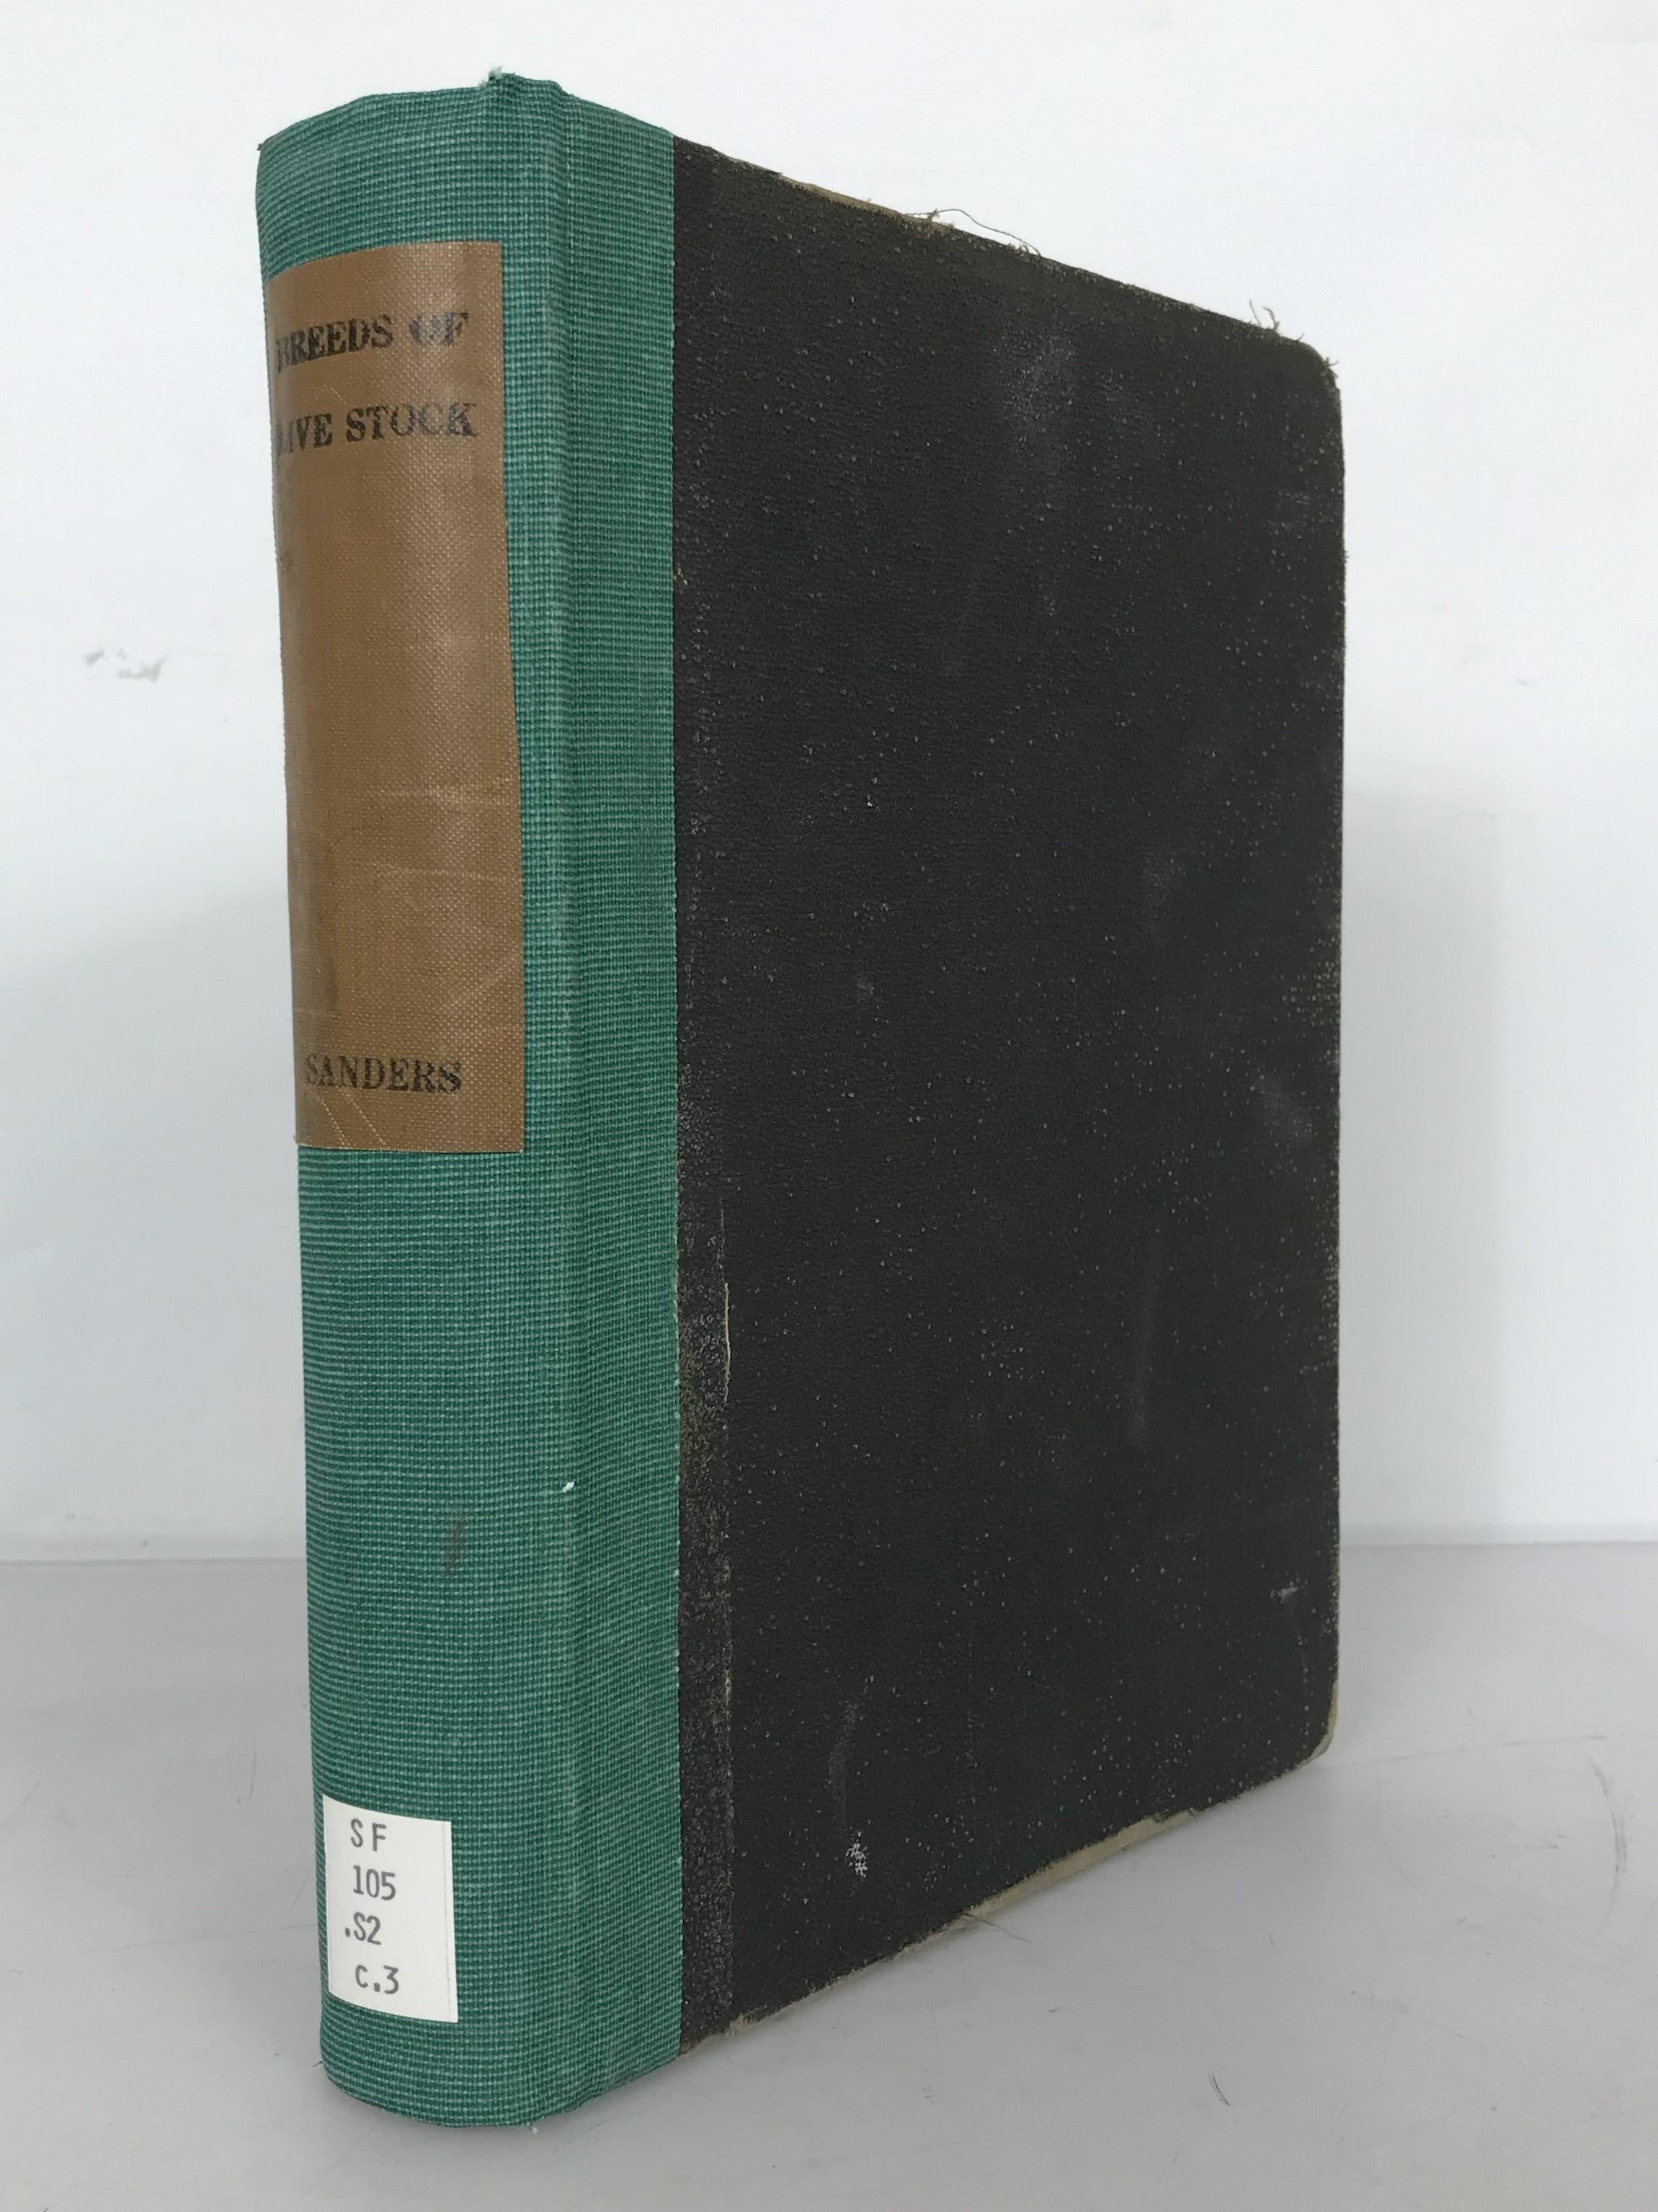 The Breeds of Live Stock and Principles of Heredity by JH Sanders Illustrated 1887